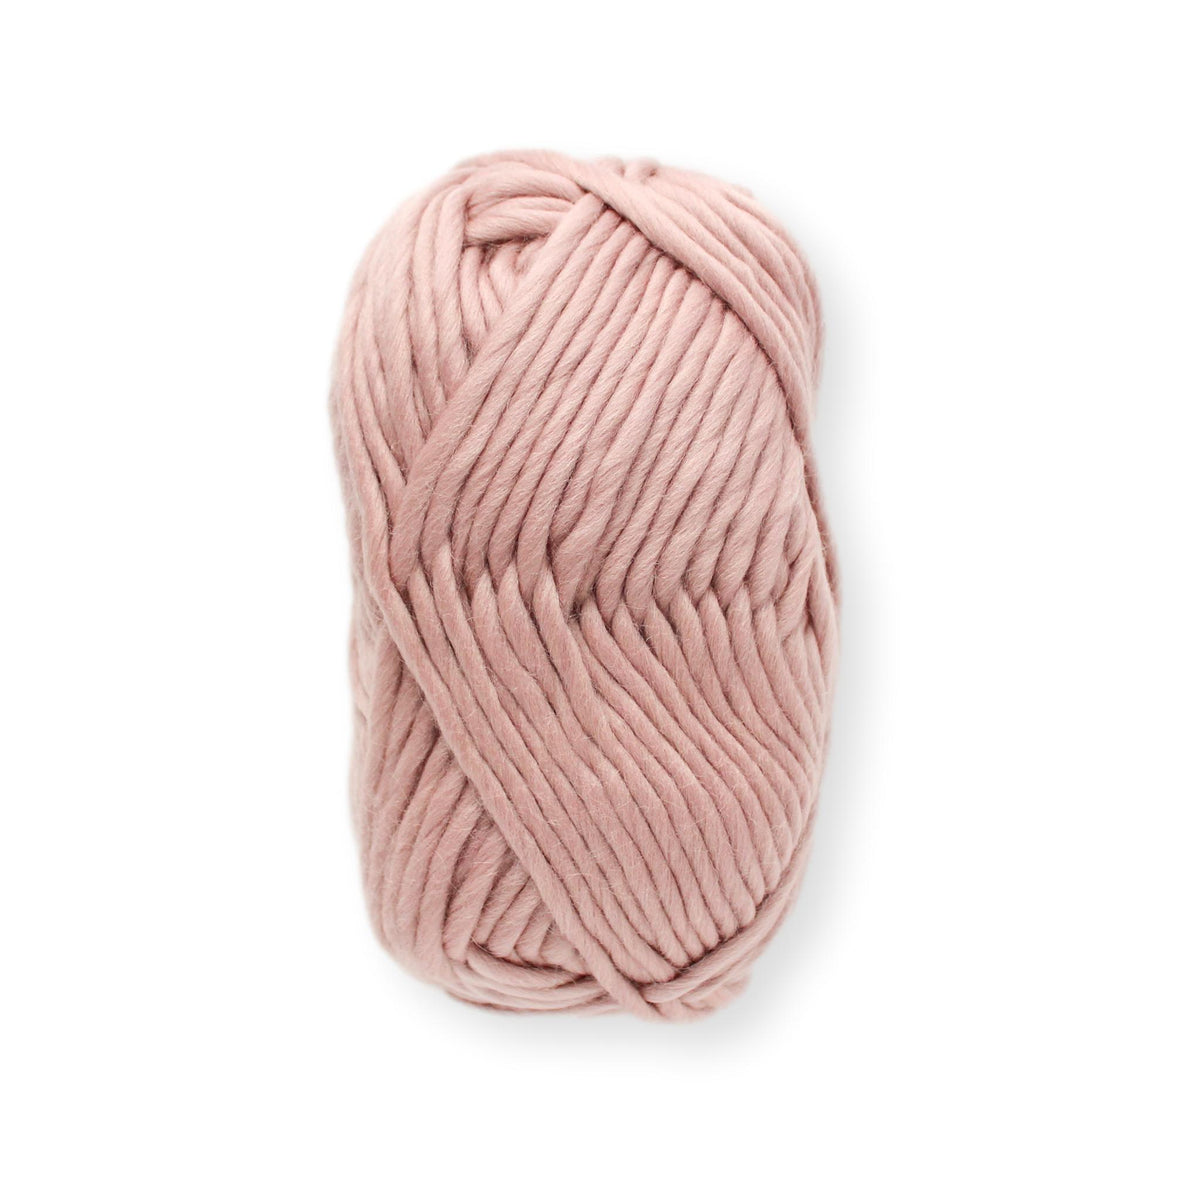 Soft Chunky - 100% Super Luxe Merino - Vintage Rose – Third Piece